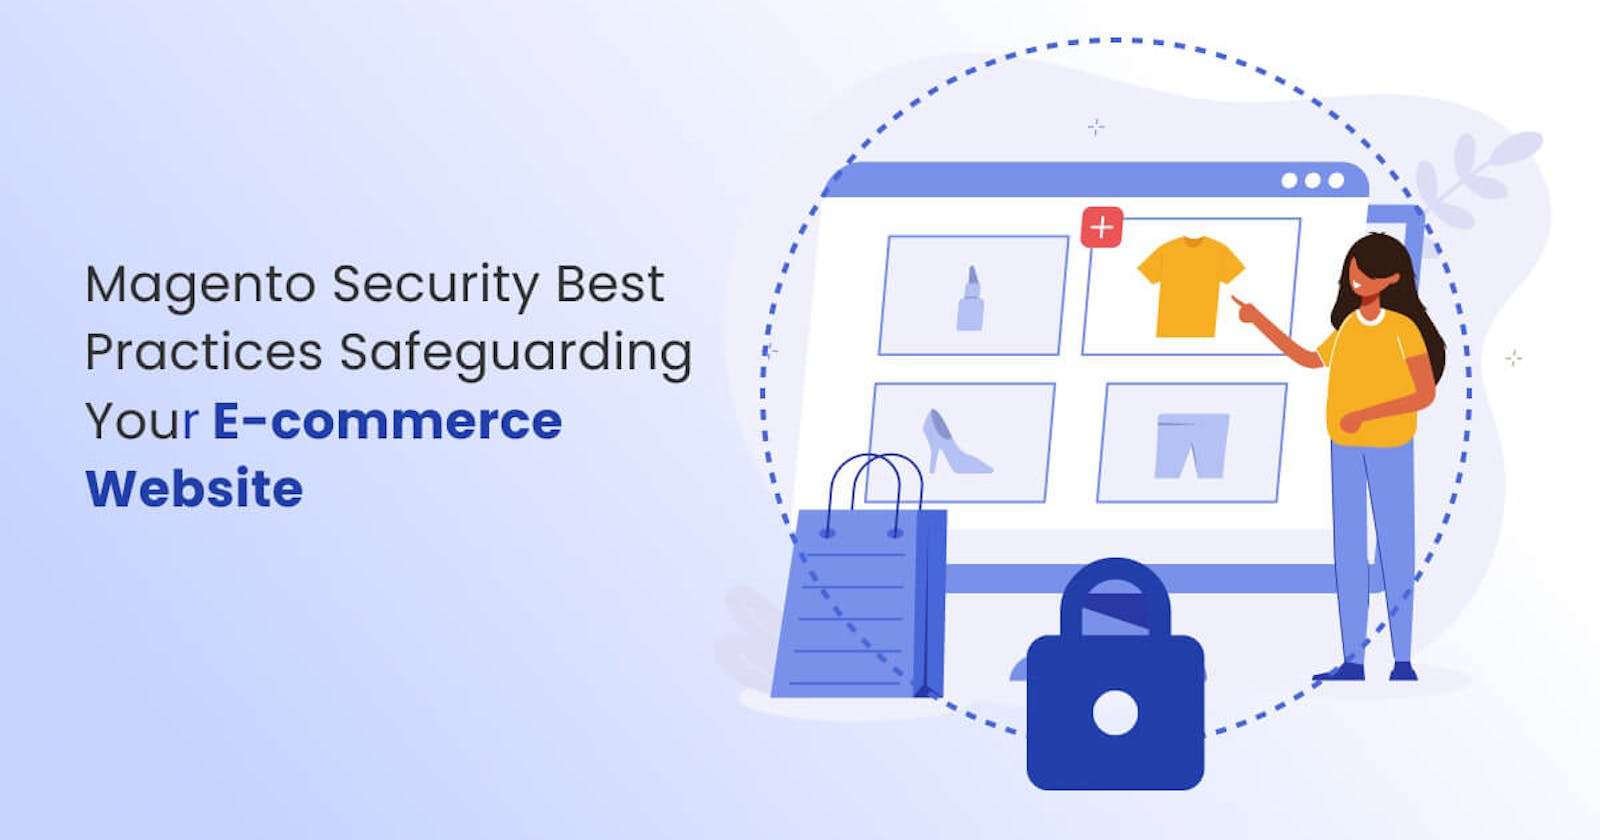 Magento Security Best Practices: Safeguarding Your E-commerce Website